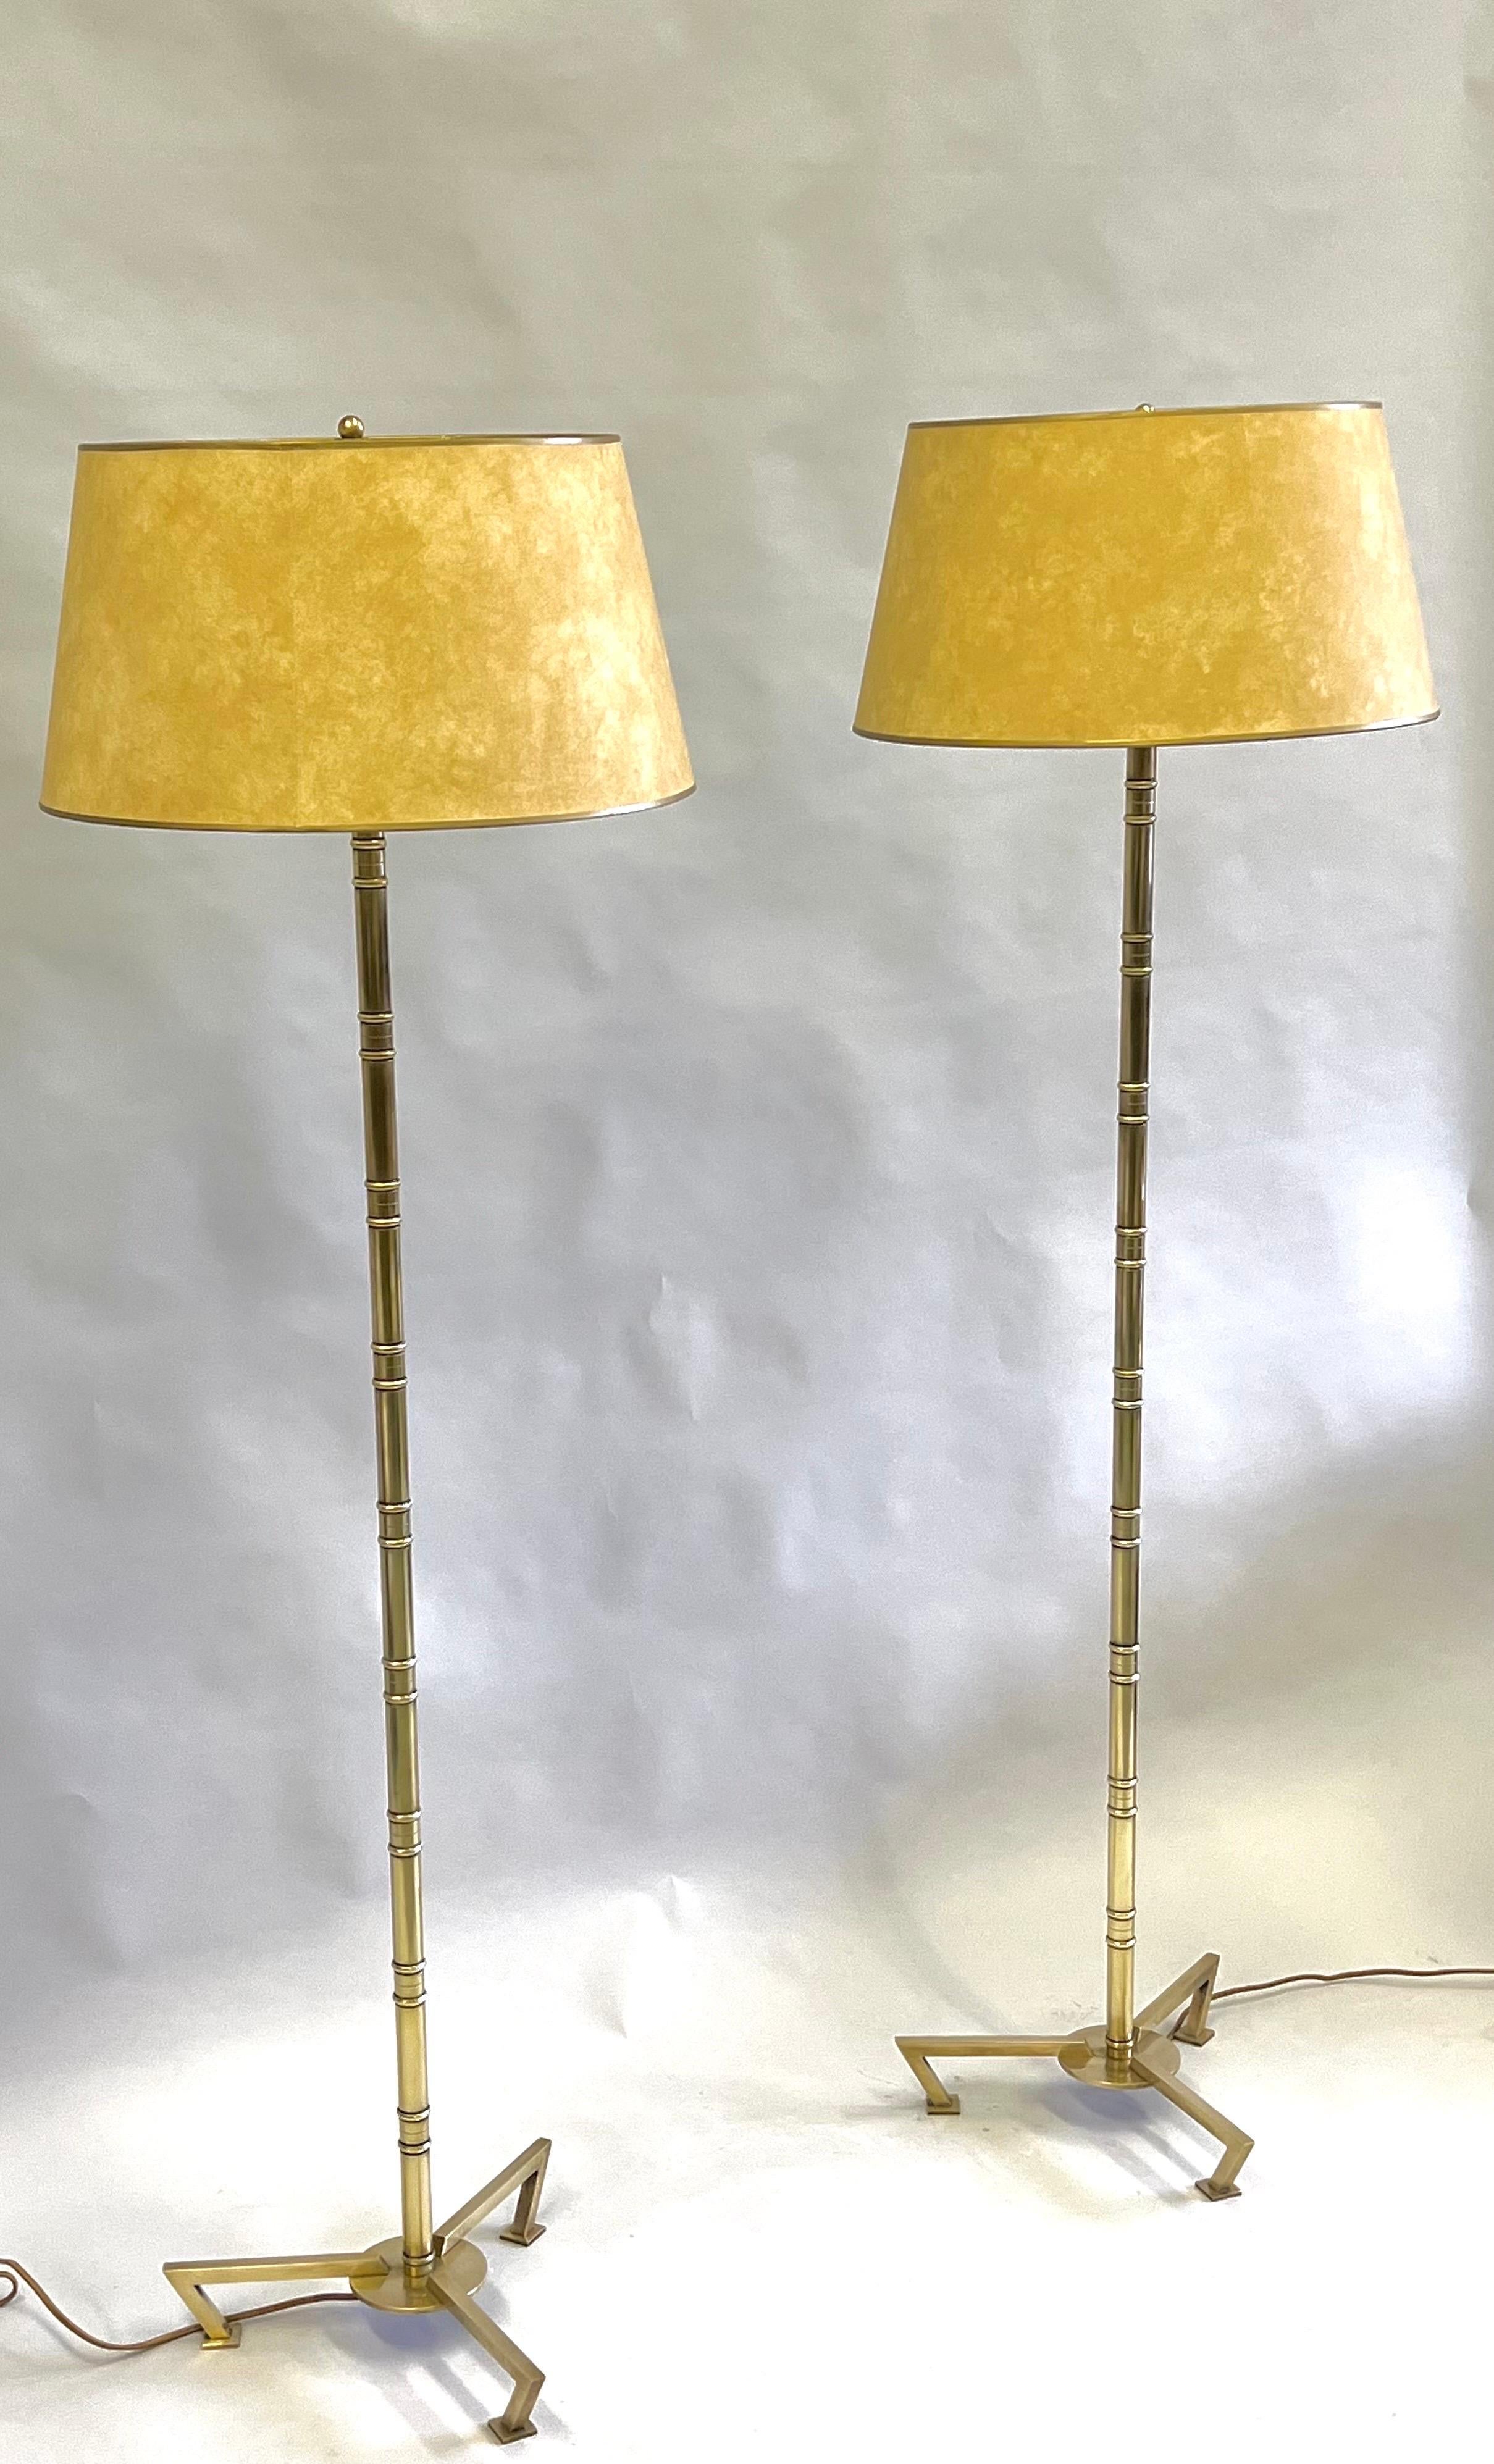 Rare, Elegant and Timeless Pair of French Mid-Century Modern Neoclassical Faux Bamboo Floor Lamps in solid brass by Maison Bagues, Paris. The brass is the highest quality and the patina is natural and derived over time. The form is exquisite using a